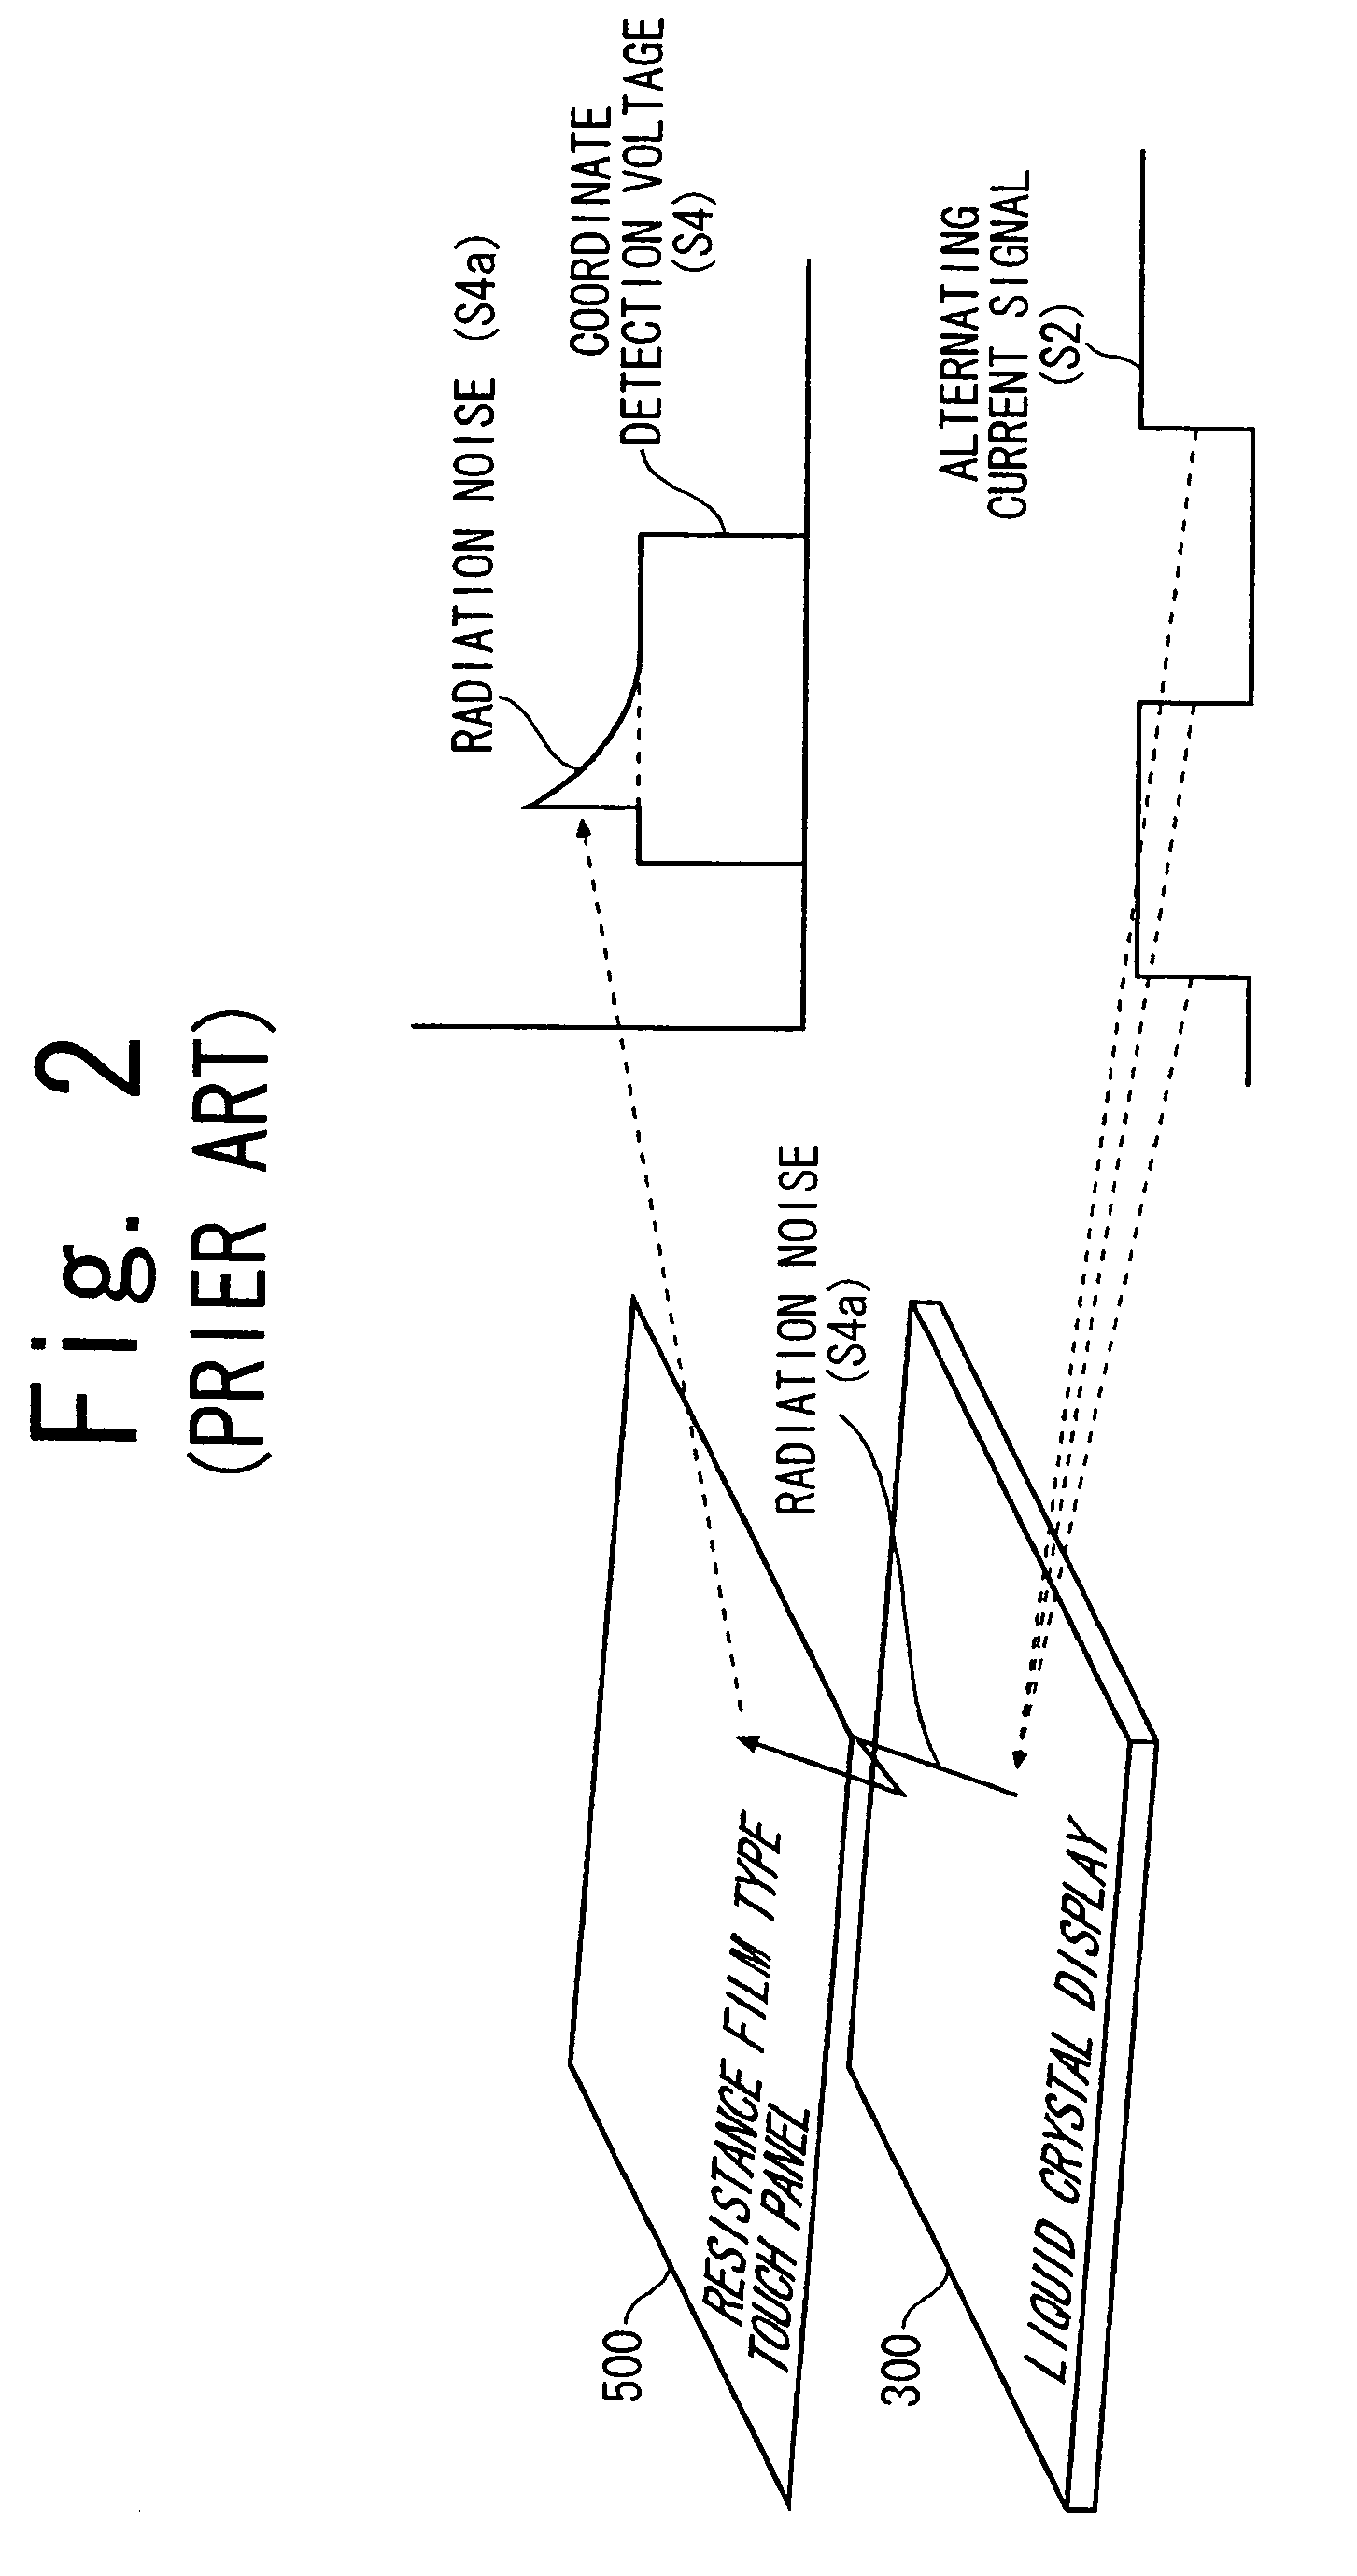 Information processing apparatus and a method of controlling the same that detects position coordinates without superimposed noise